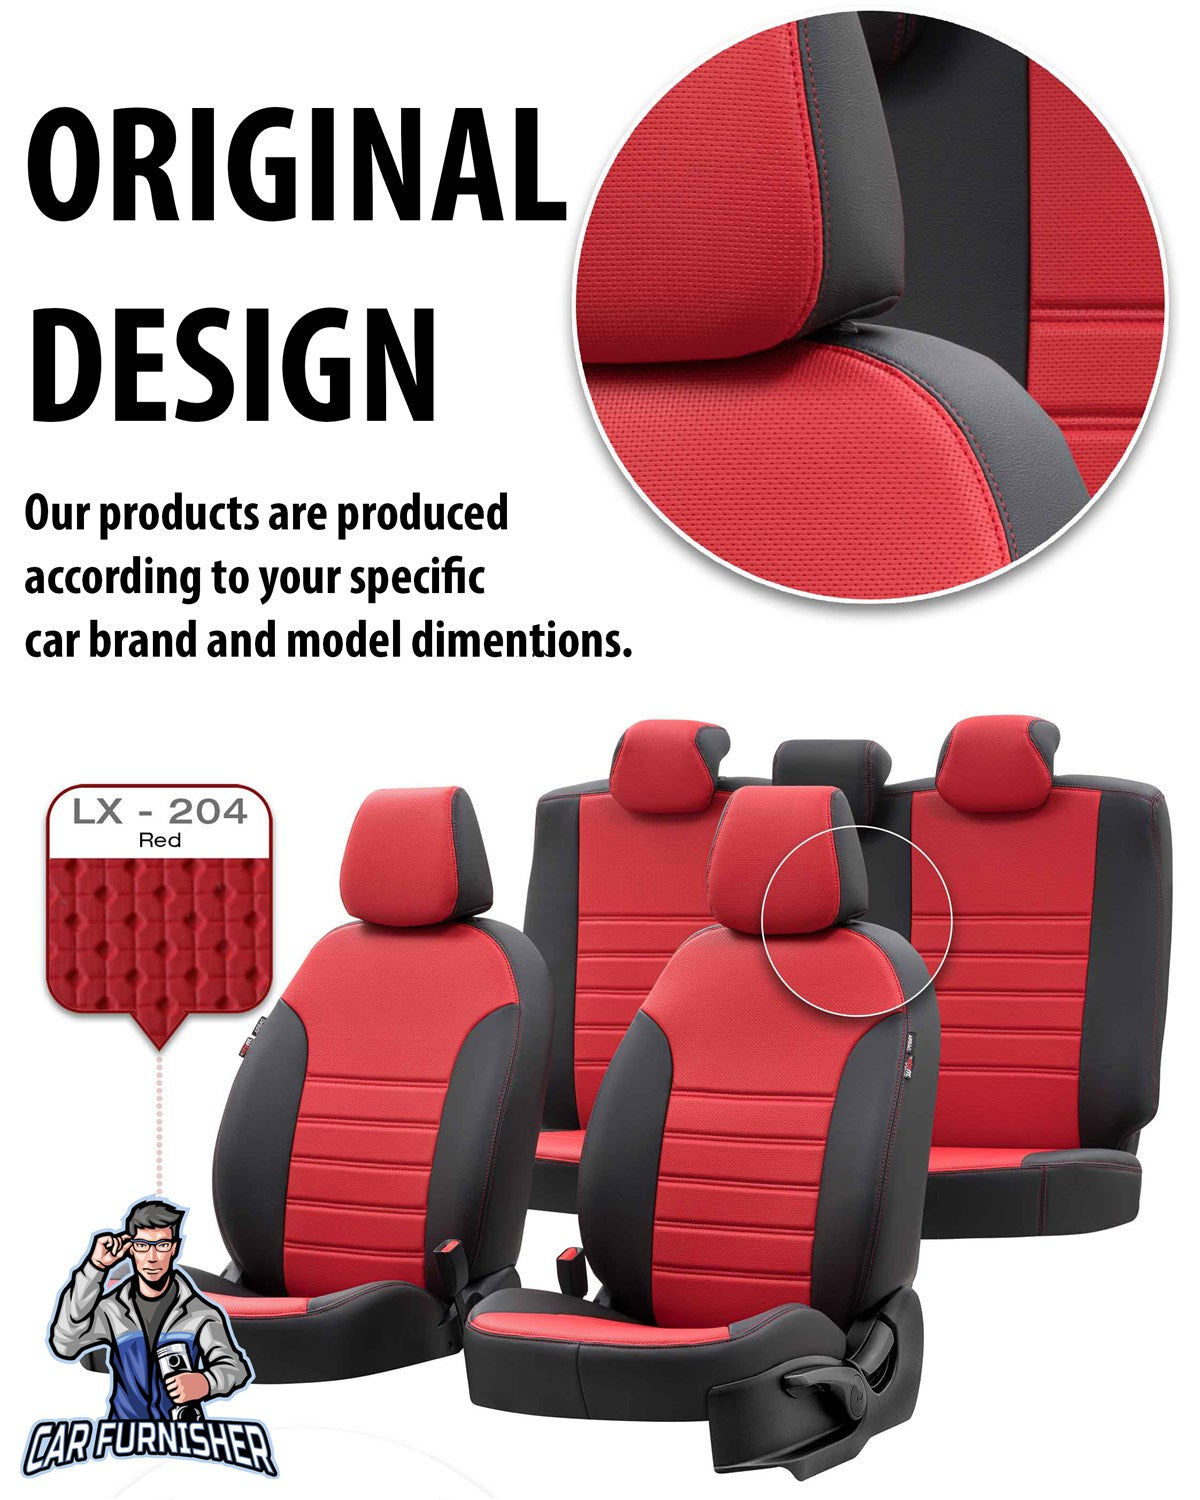 Renault Safrane Seat Covers New York Leather Design Smoked Leather